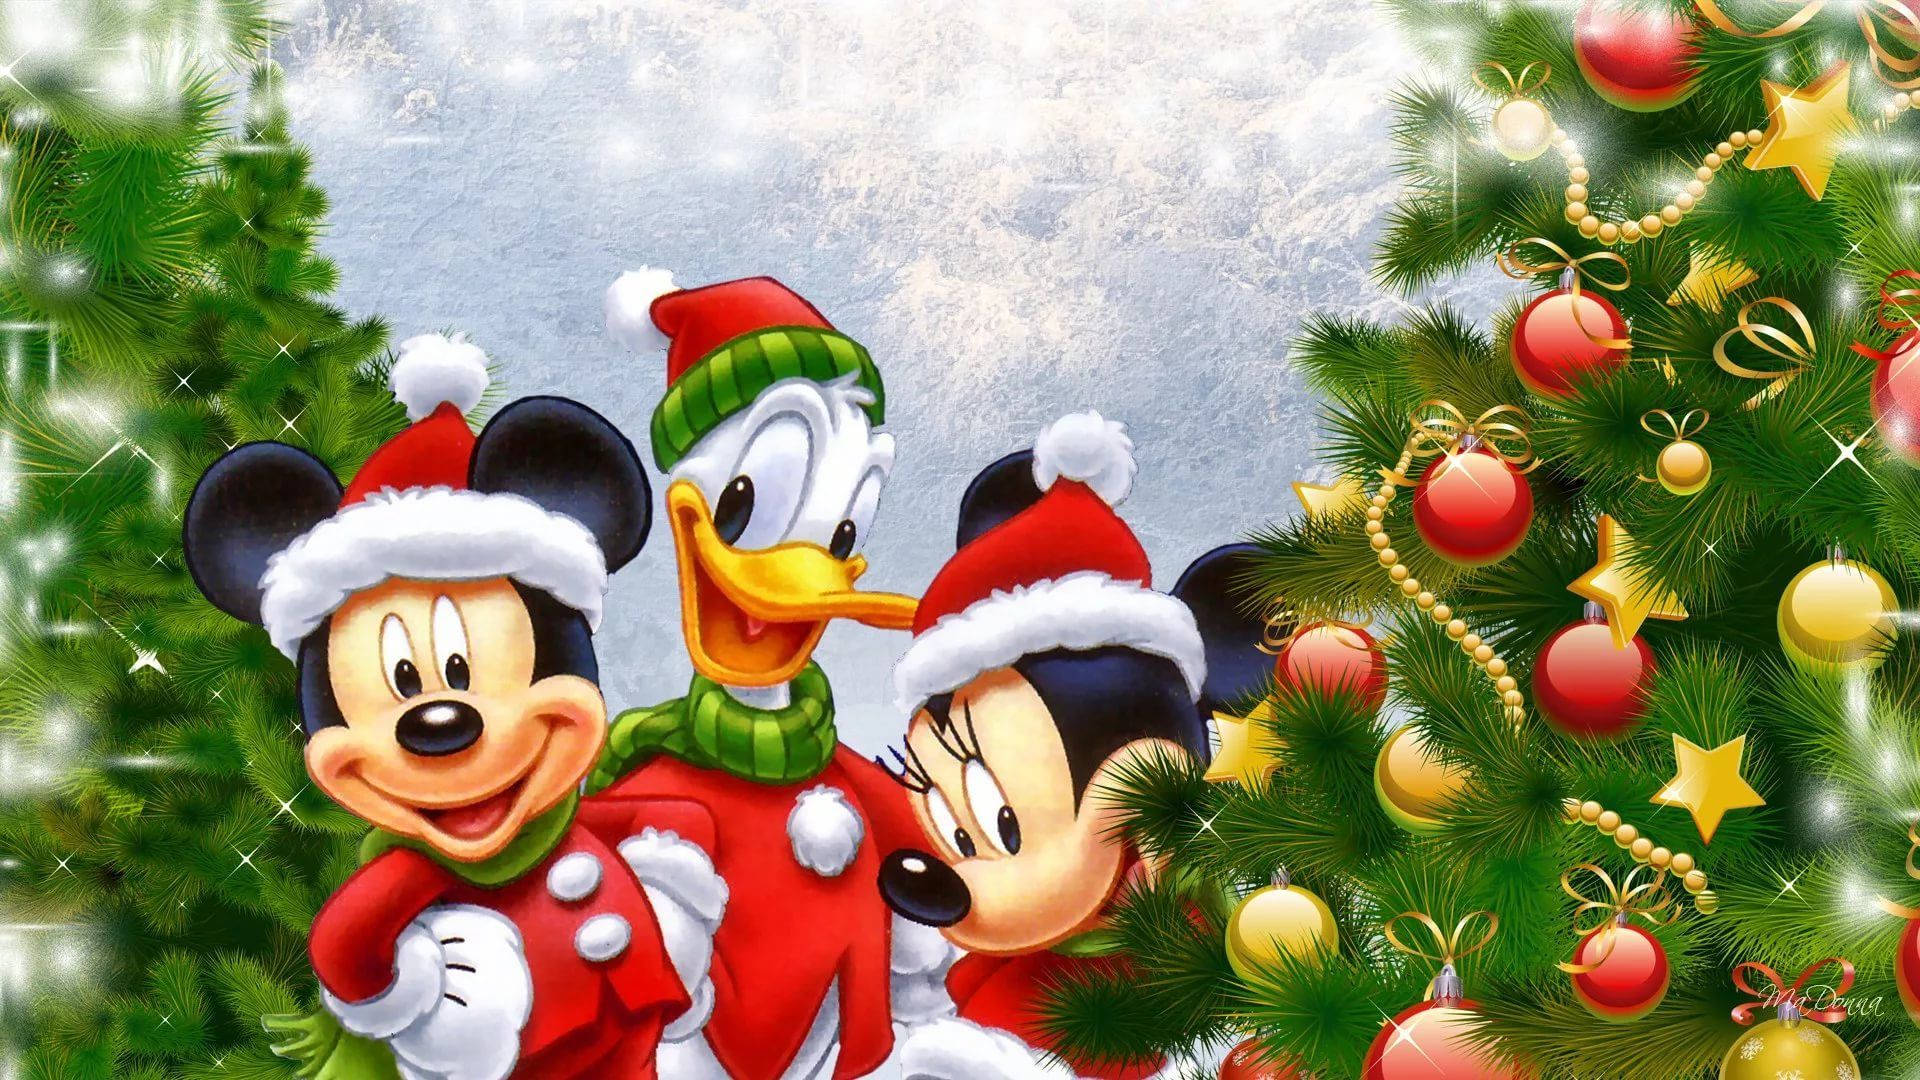 Disney 1920x1080 Hd Mickey Mouse And Friends Christmas Trees Background